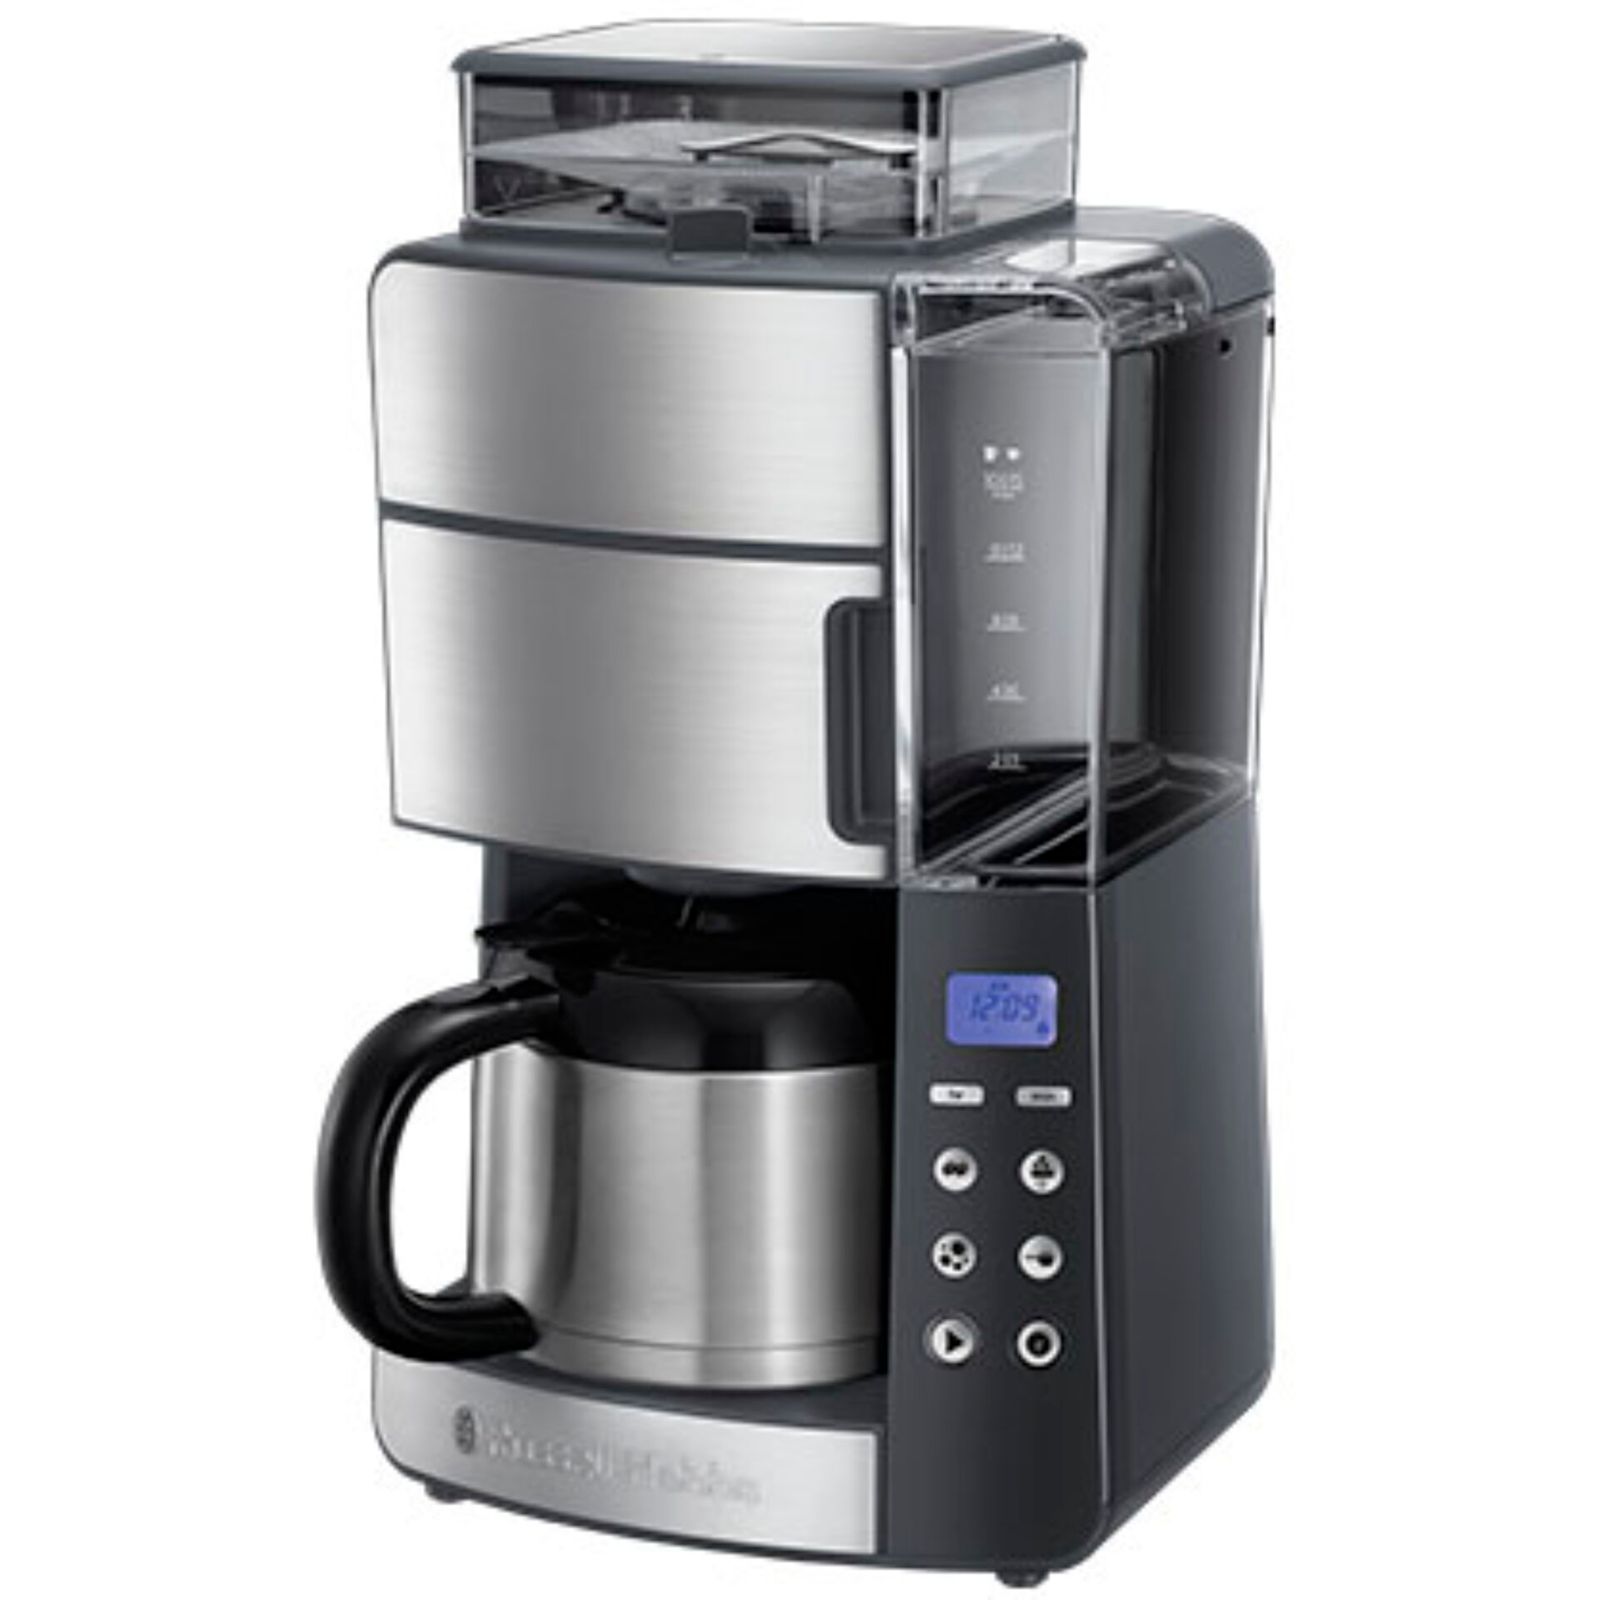 Russell Hobbs 25620-56 Grind&Brew Dig. Thermo-Kaffeem.